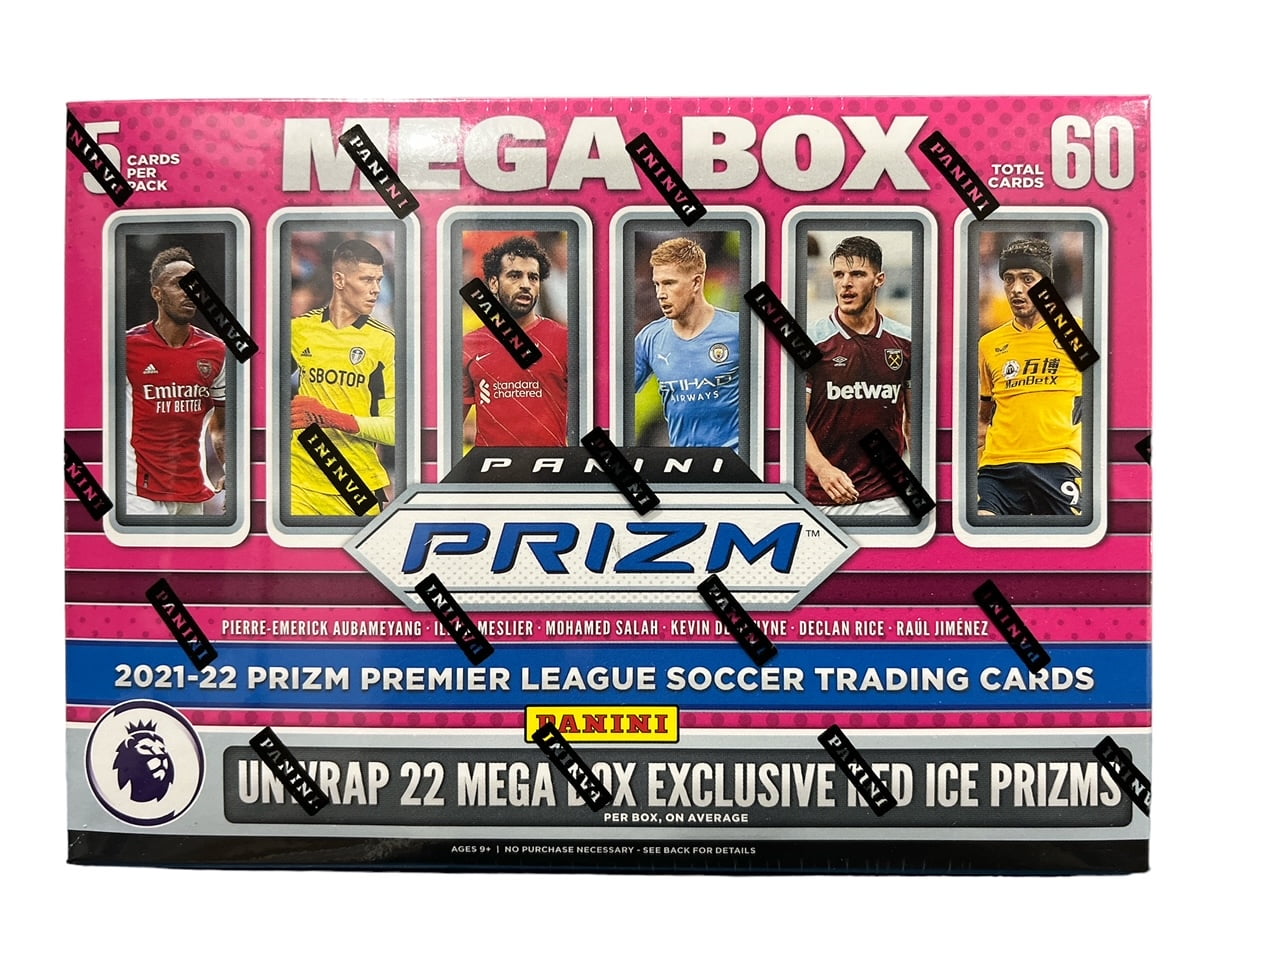 Buy Arsenal SoccerStarz 3-Piece Combo Pack online at SoccerCards.ca!